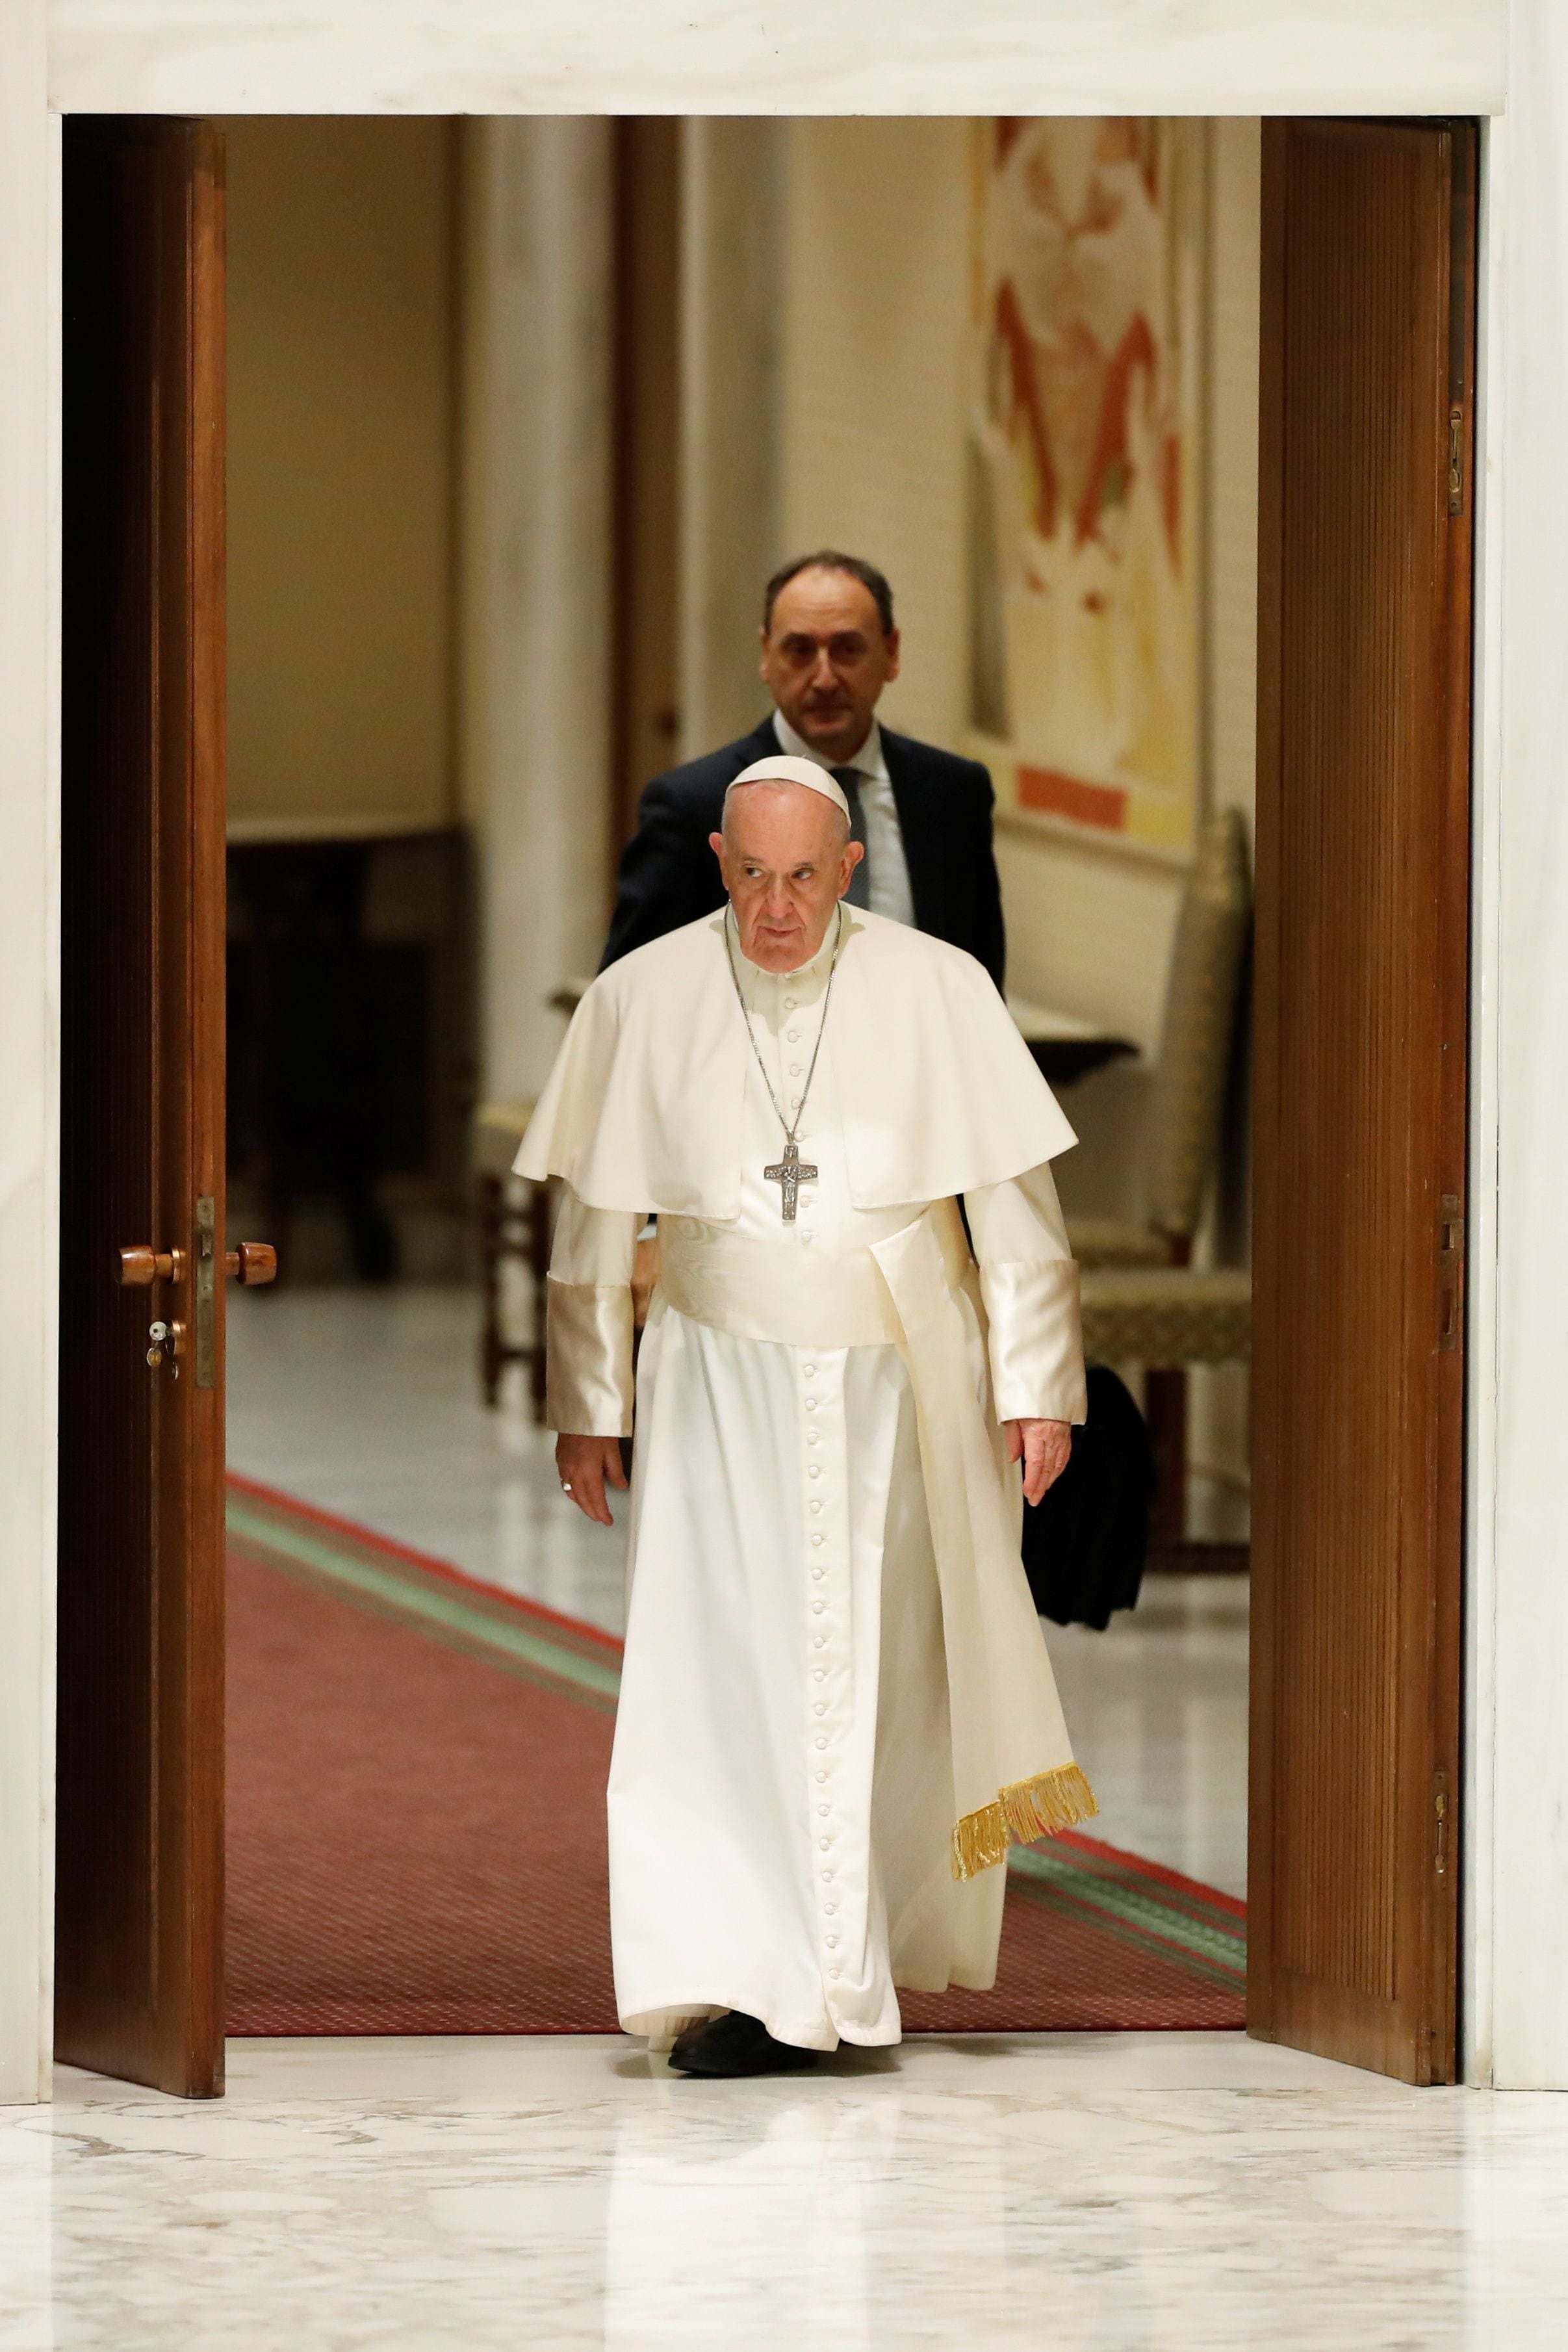 The pope arriving at the general audience (REUTERS / Remo Casilli)